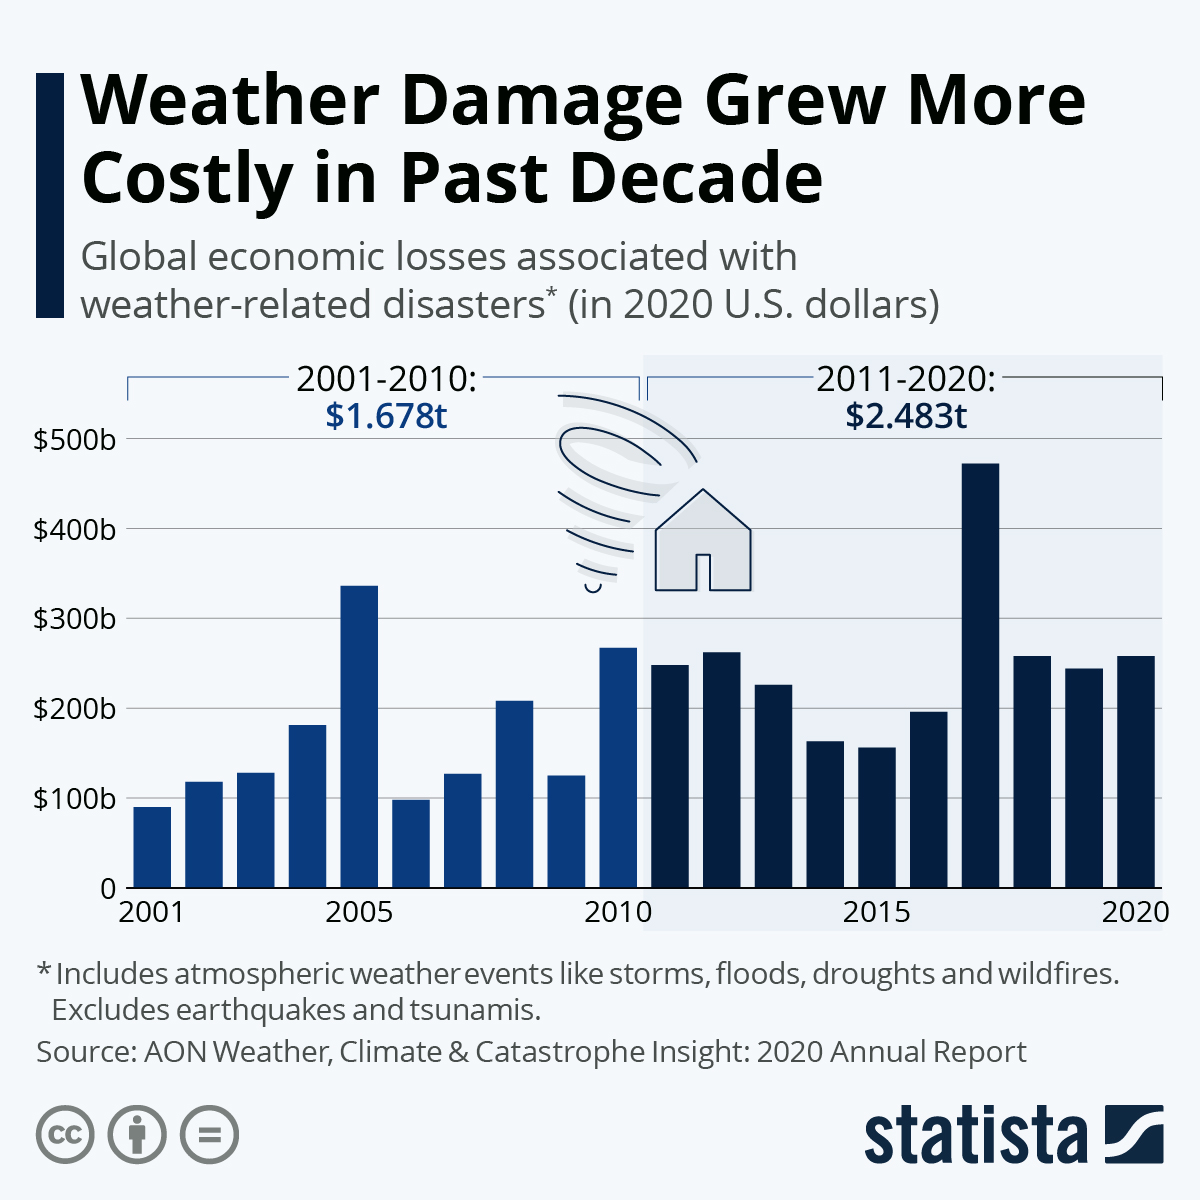 Weather Damage Grew More Costly in Past Decade